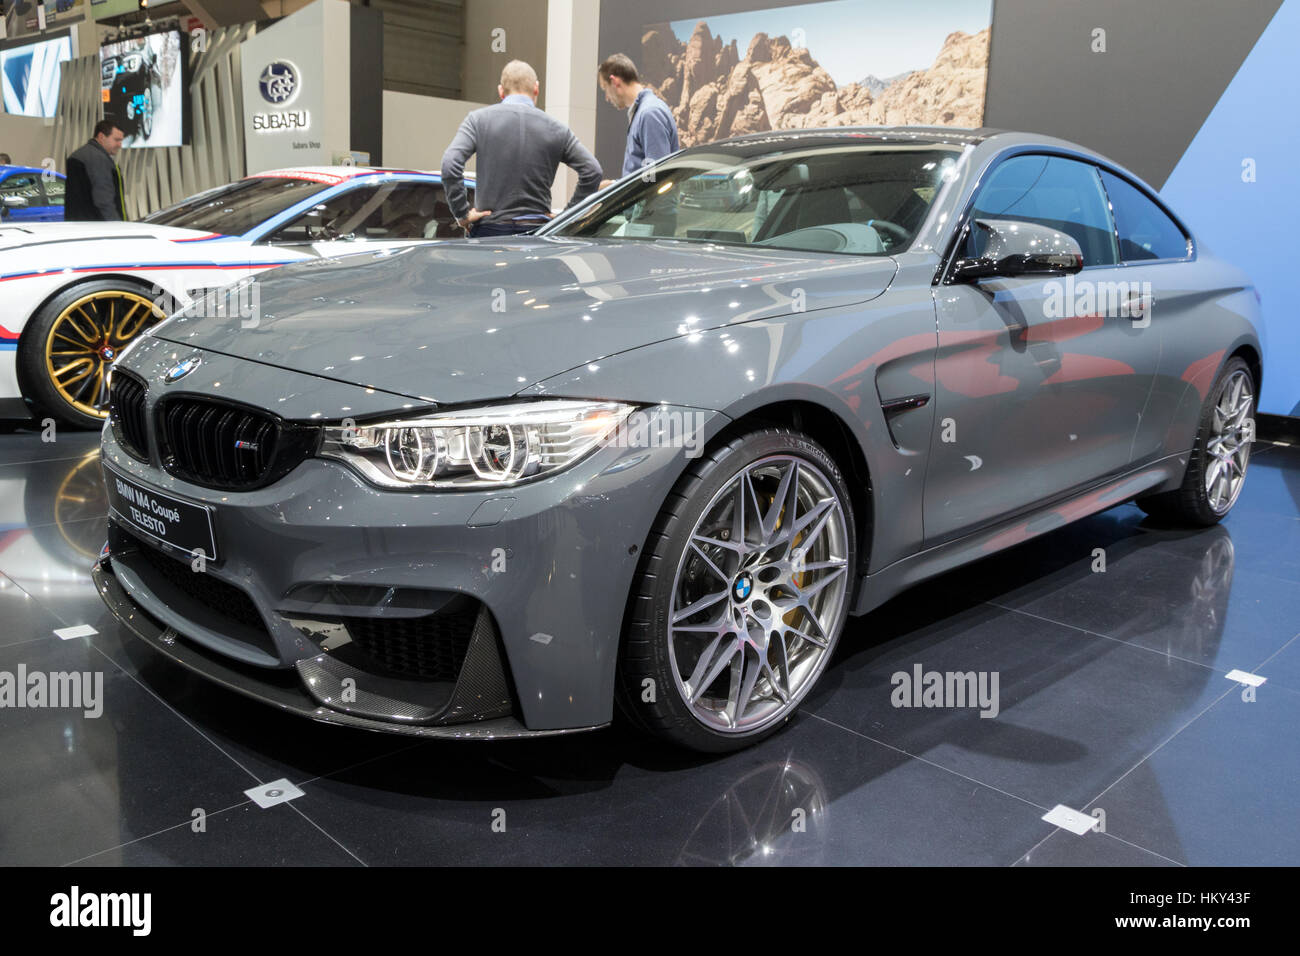 BRUSSELS - JAN 19, 2017: BMW M4 Coupe TELESTO car at the Motor Show Brussels. Stock Photo